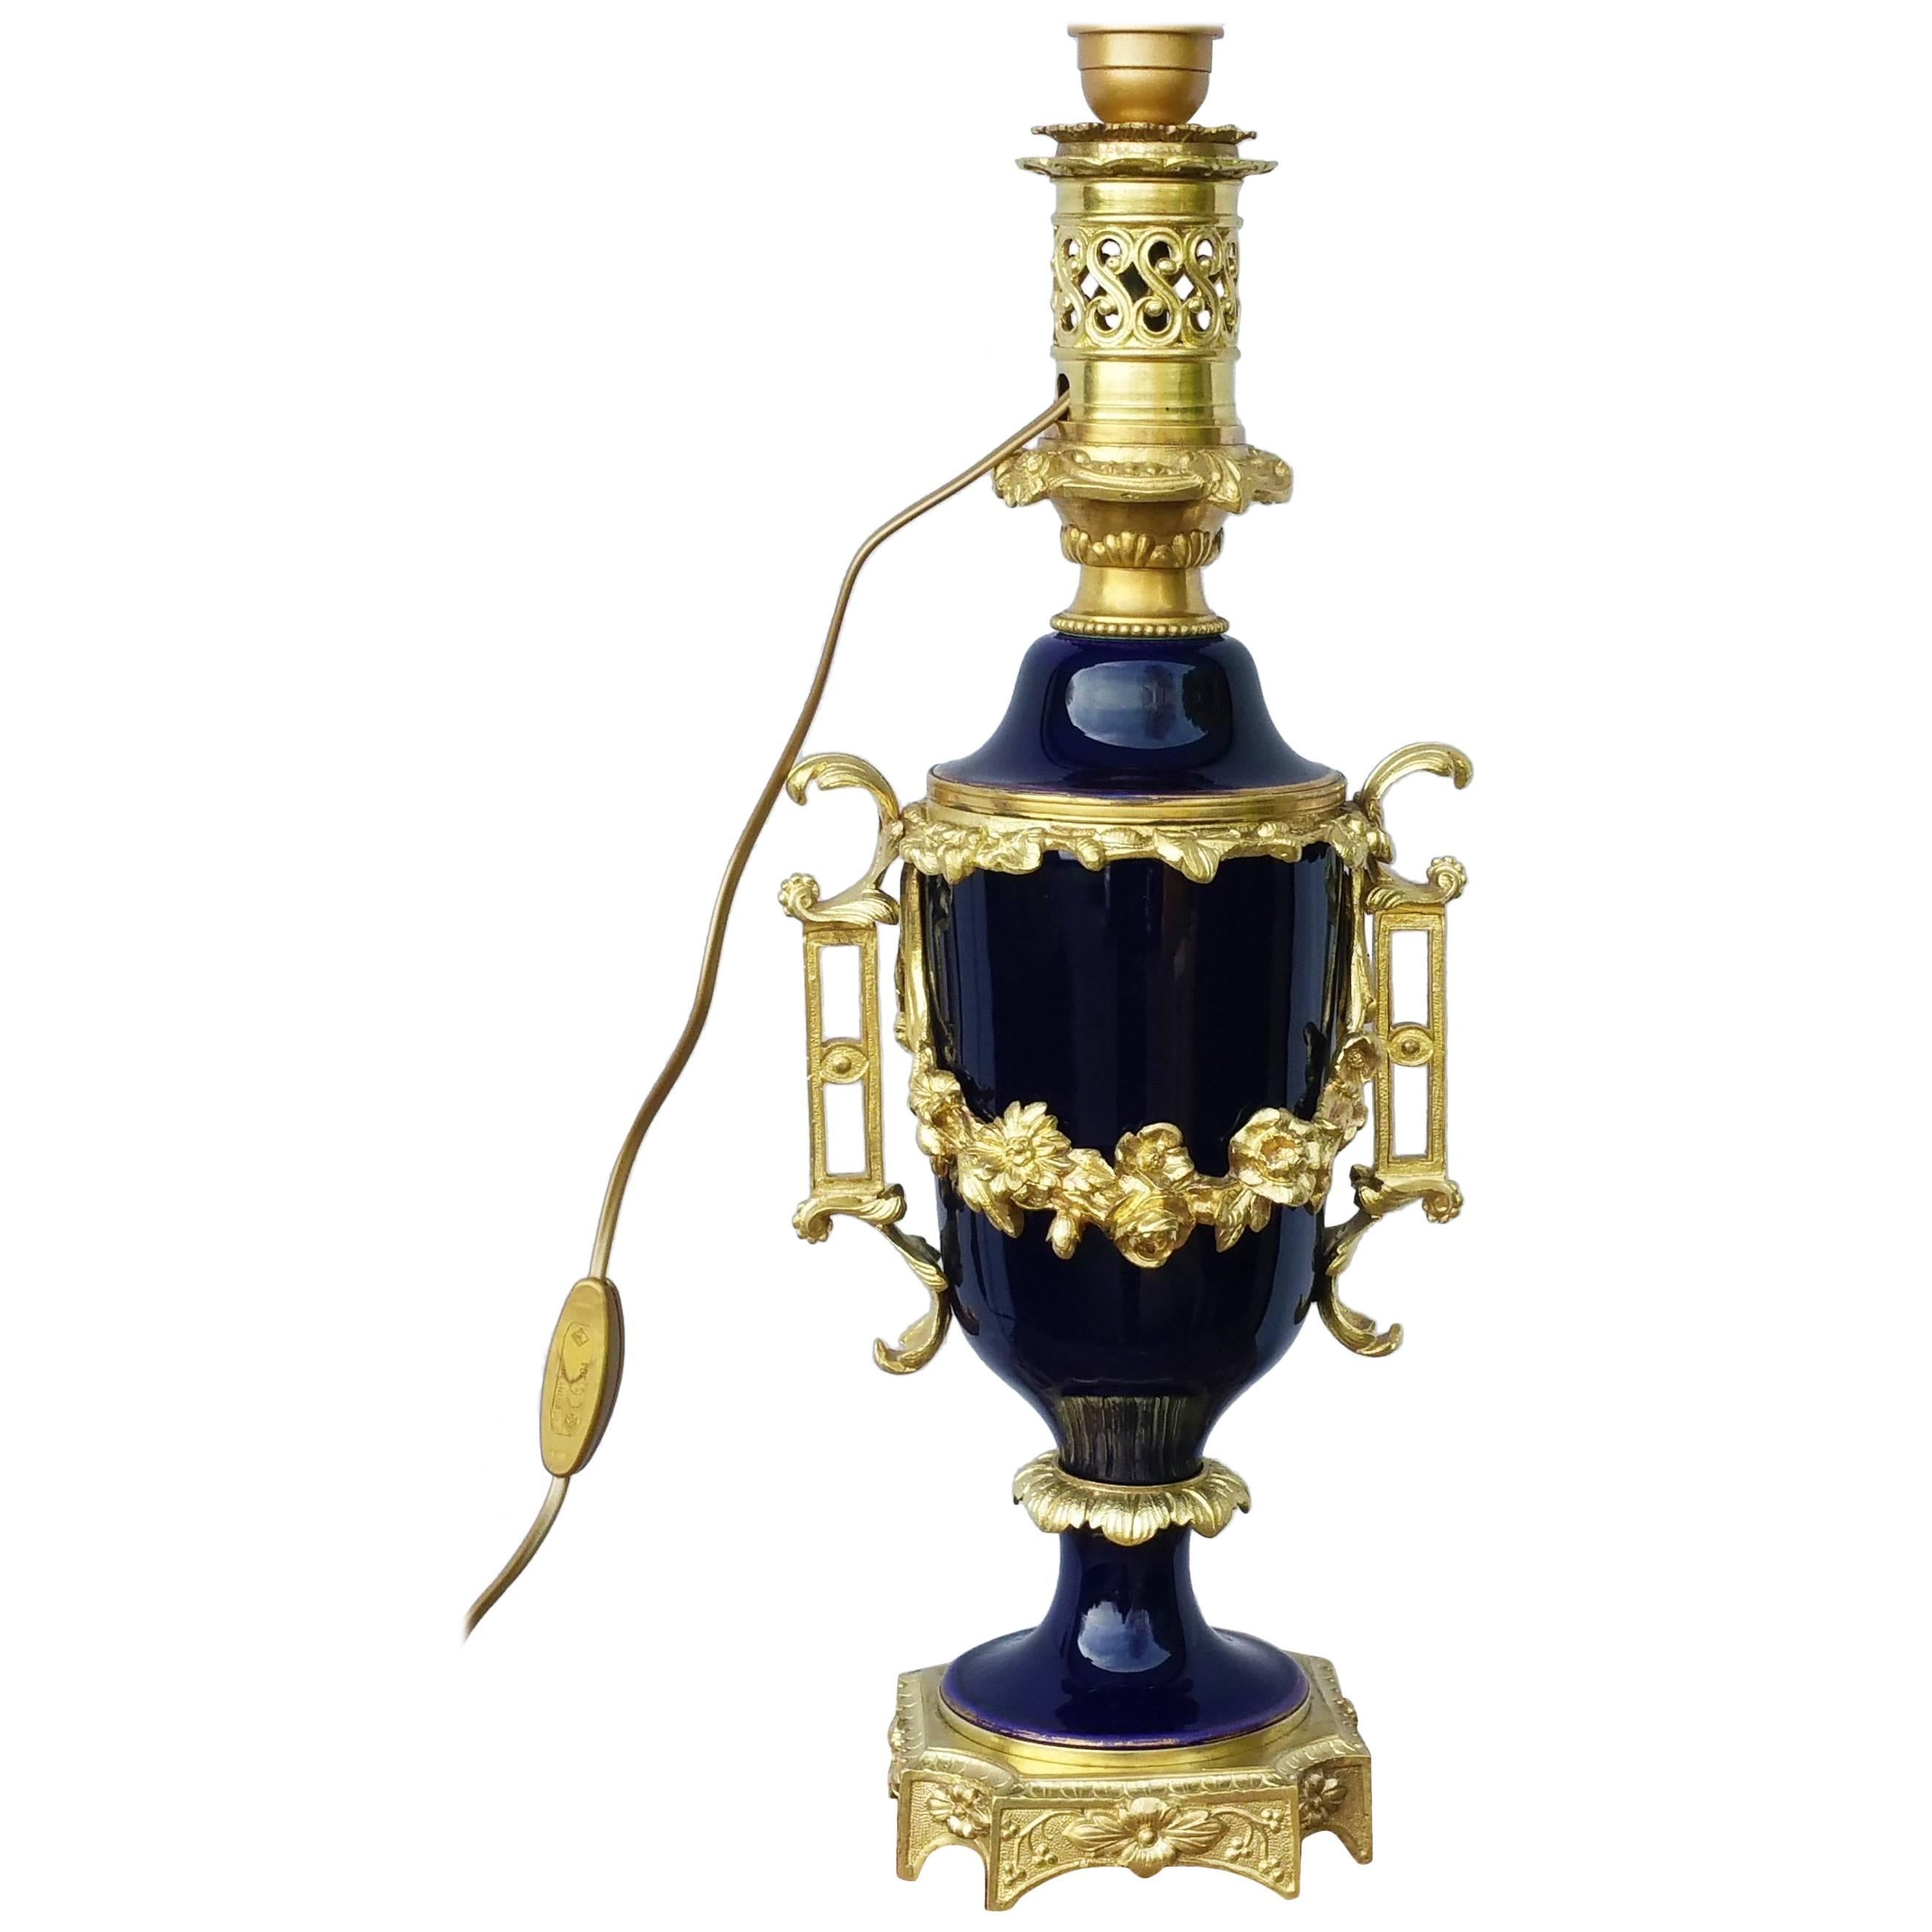 Sèvres Porcelain and Gilt Bronze Napoleon III Tall Table Lamp, France, 1880